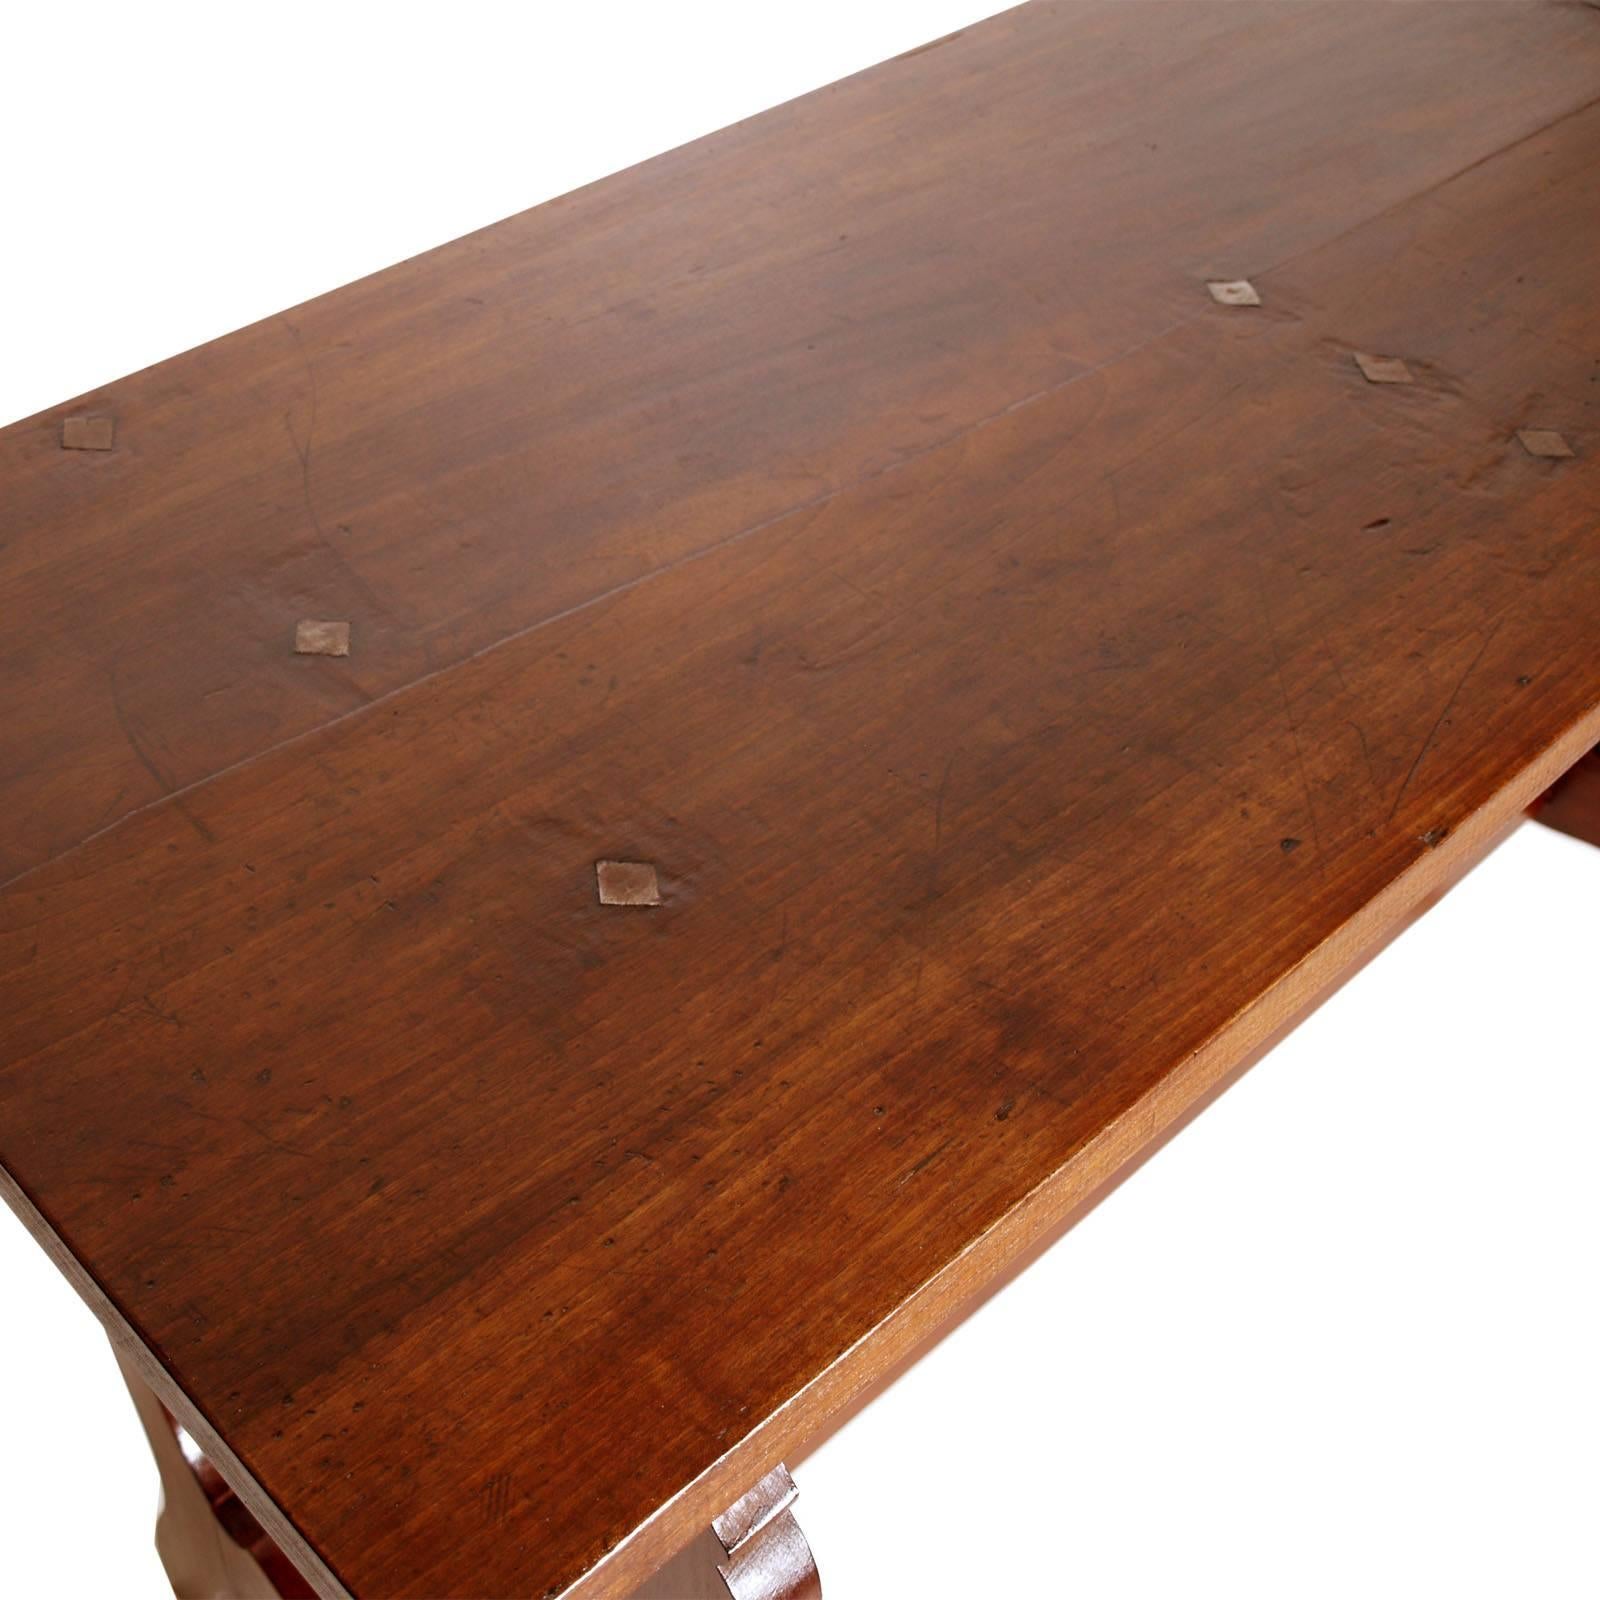 Era neoclassicism elegant Italian Frattino table all solid walnut wax-polished 

Very elegant neoclassic rectangular table in Renaissance style. In the simplicity of the form this table expresses elegance in some austere ways, when the memory of